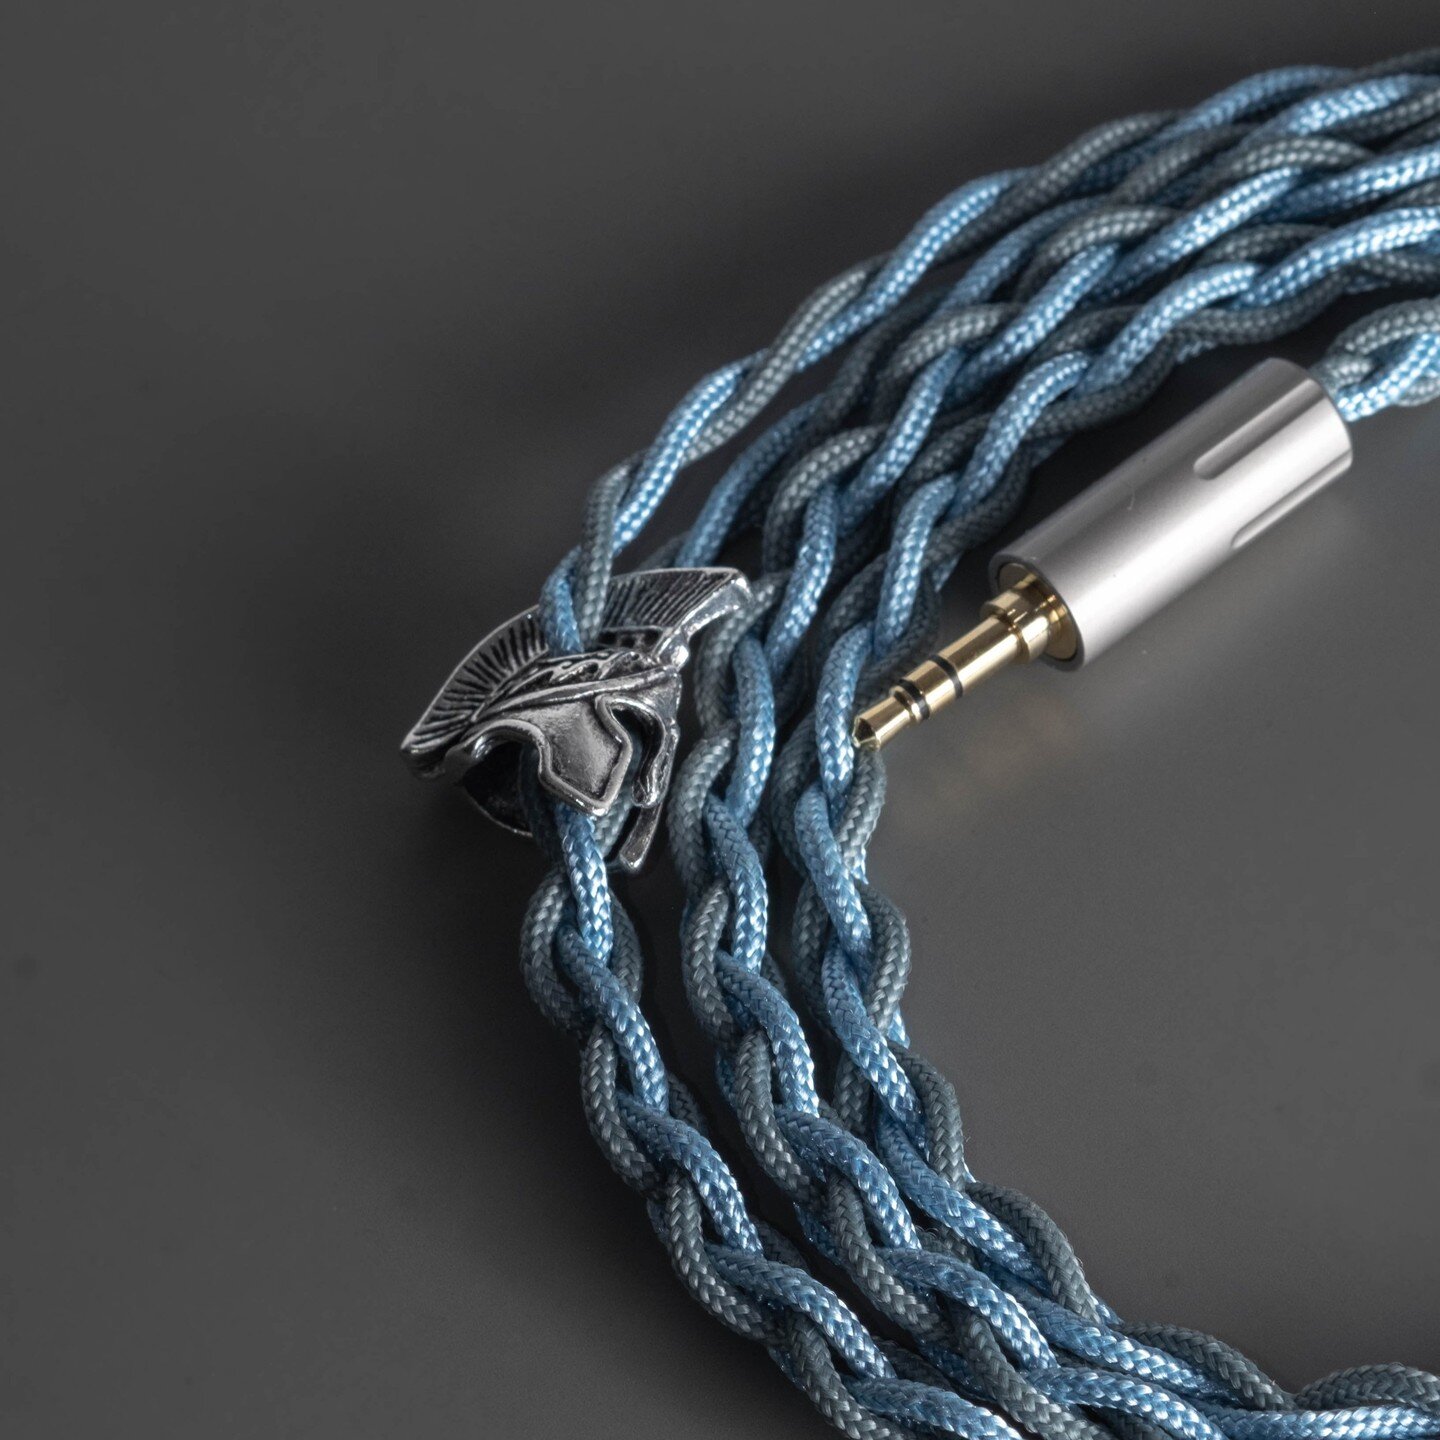 Sonum III is here! Redesigned wire with 4N OFC and Litz type 1 imported from japan! 

https://gladiatorcables.com/gladiator-line/p/iem-sonum-iii